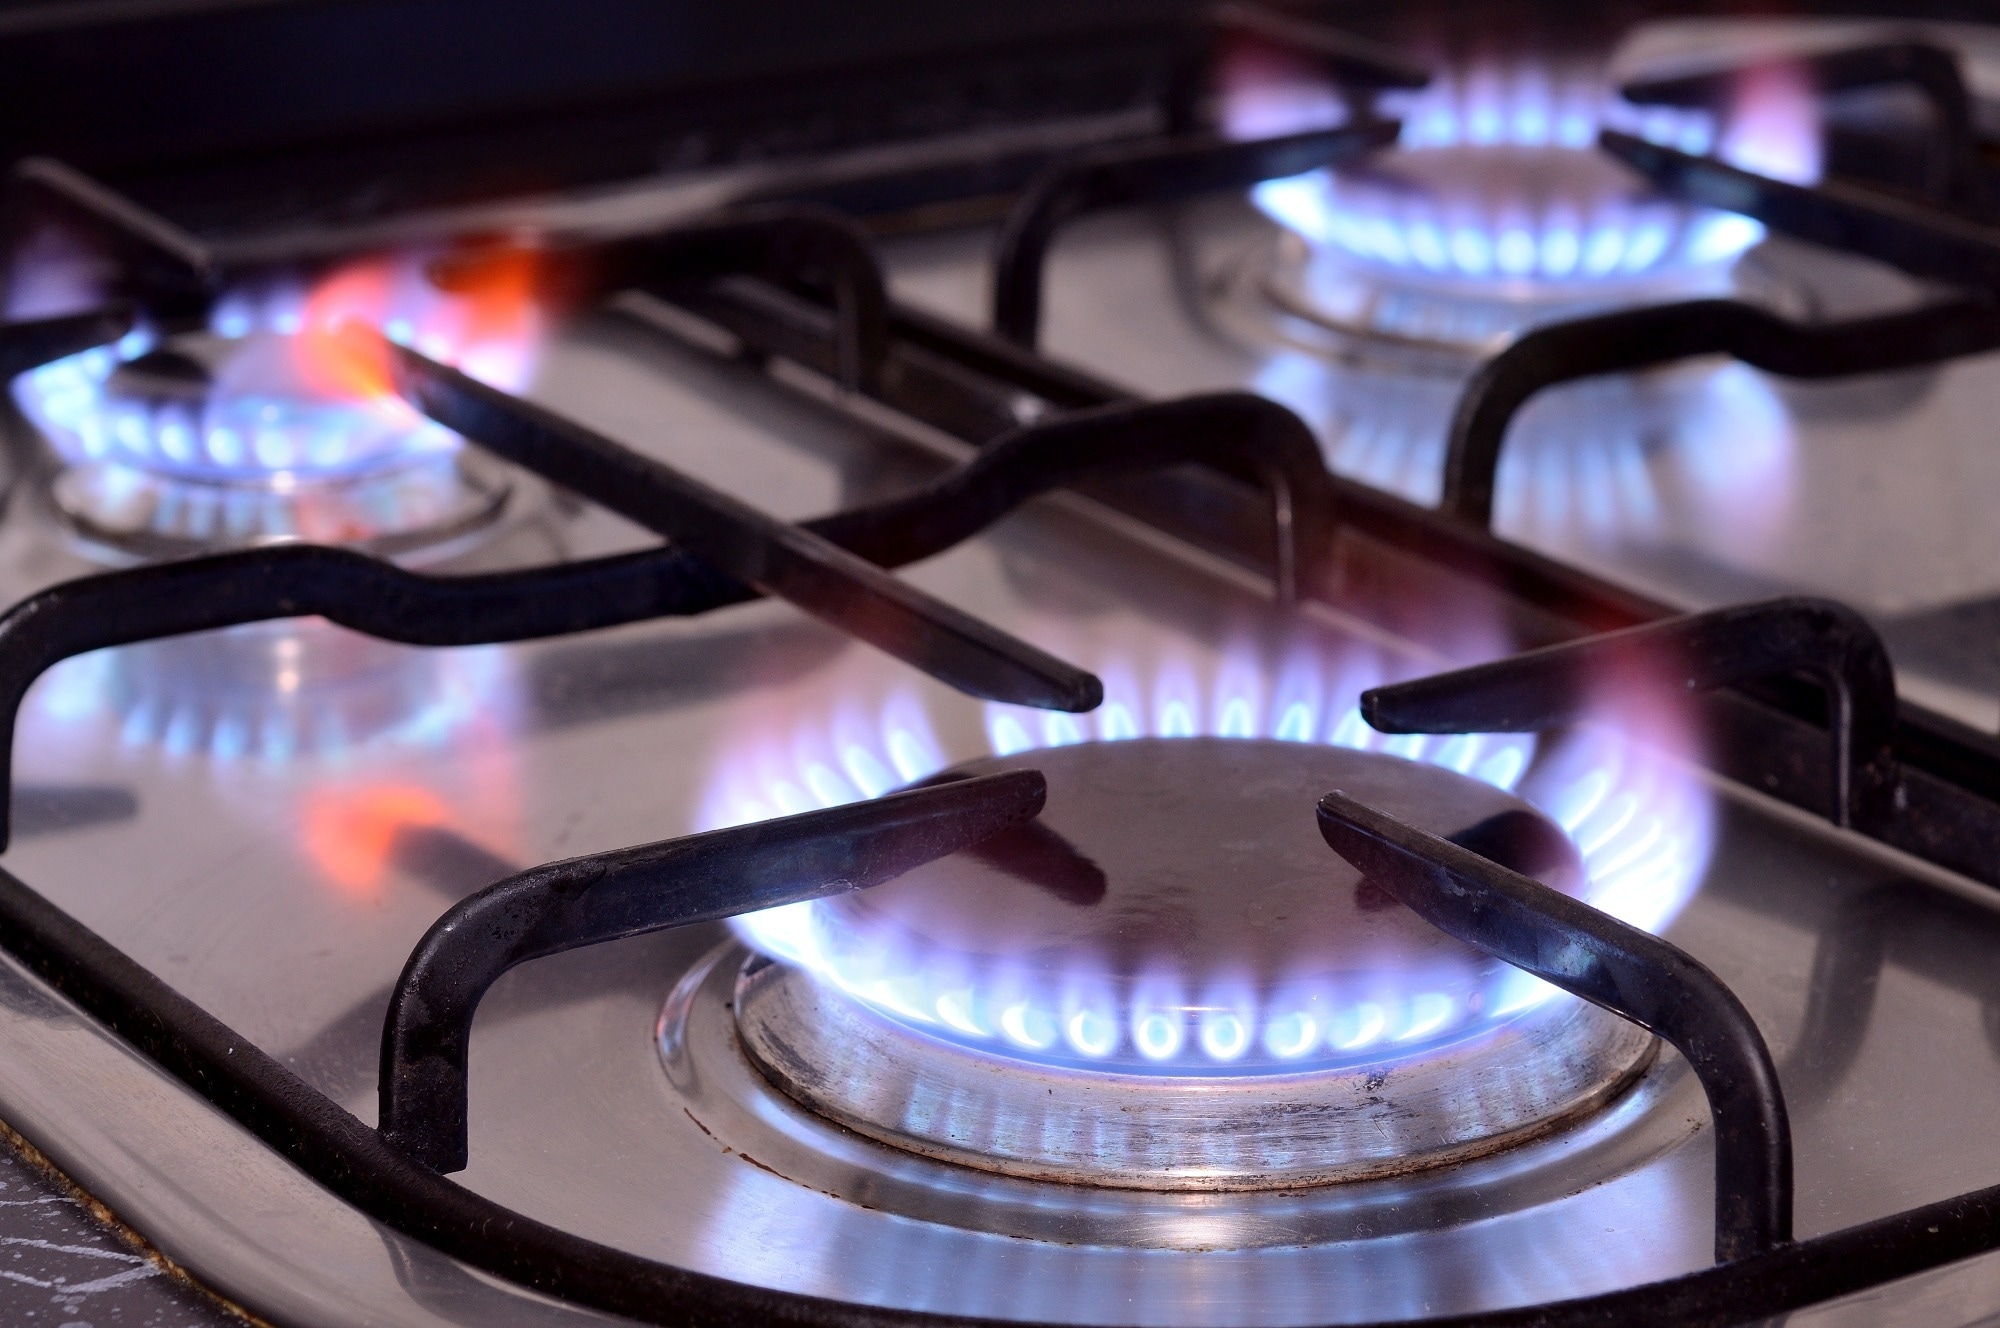 The invisible threat: gas stoves contaminate indoor air with benzene